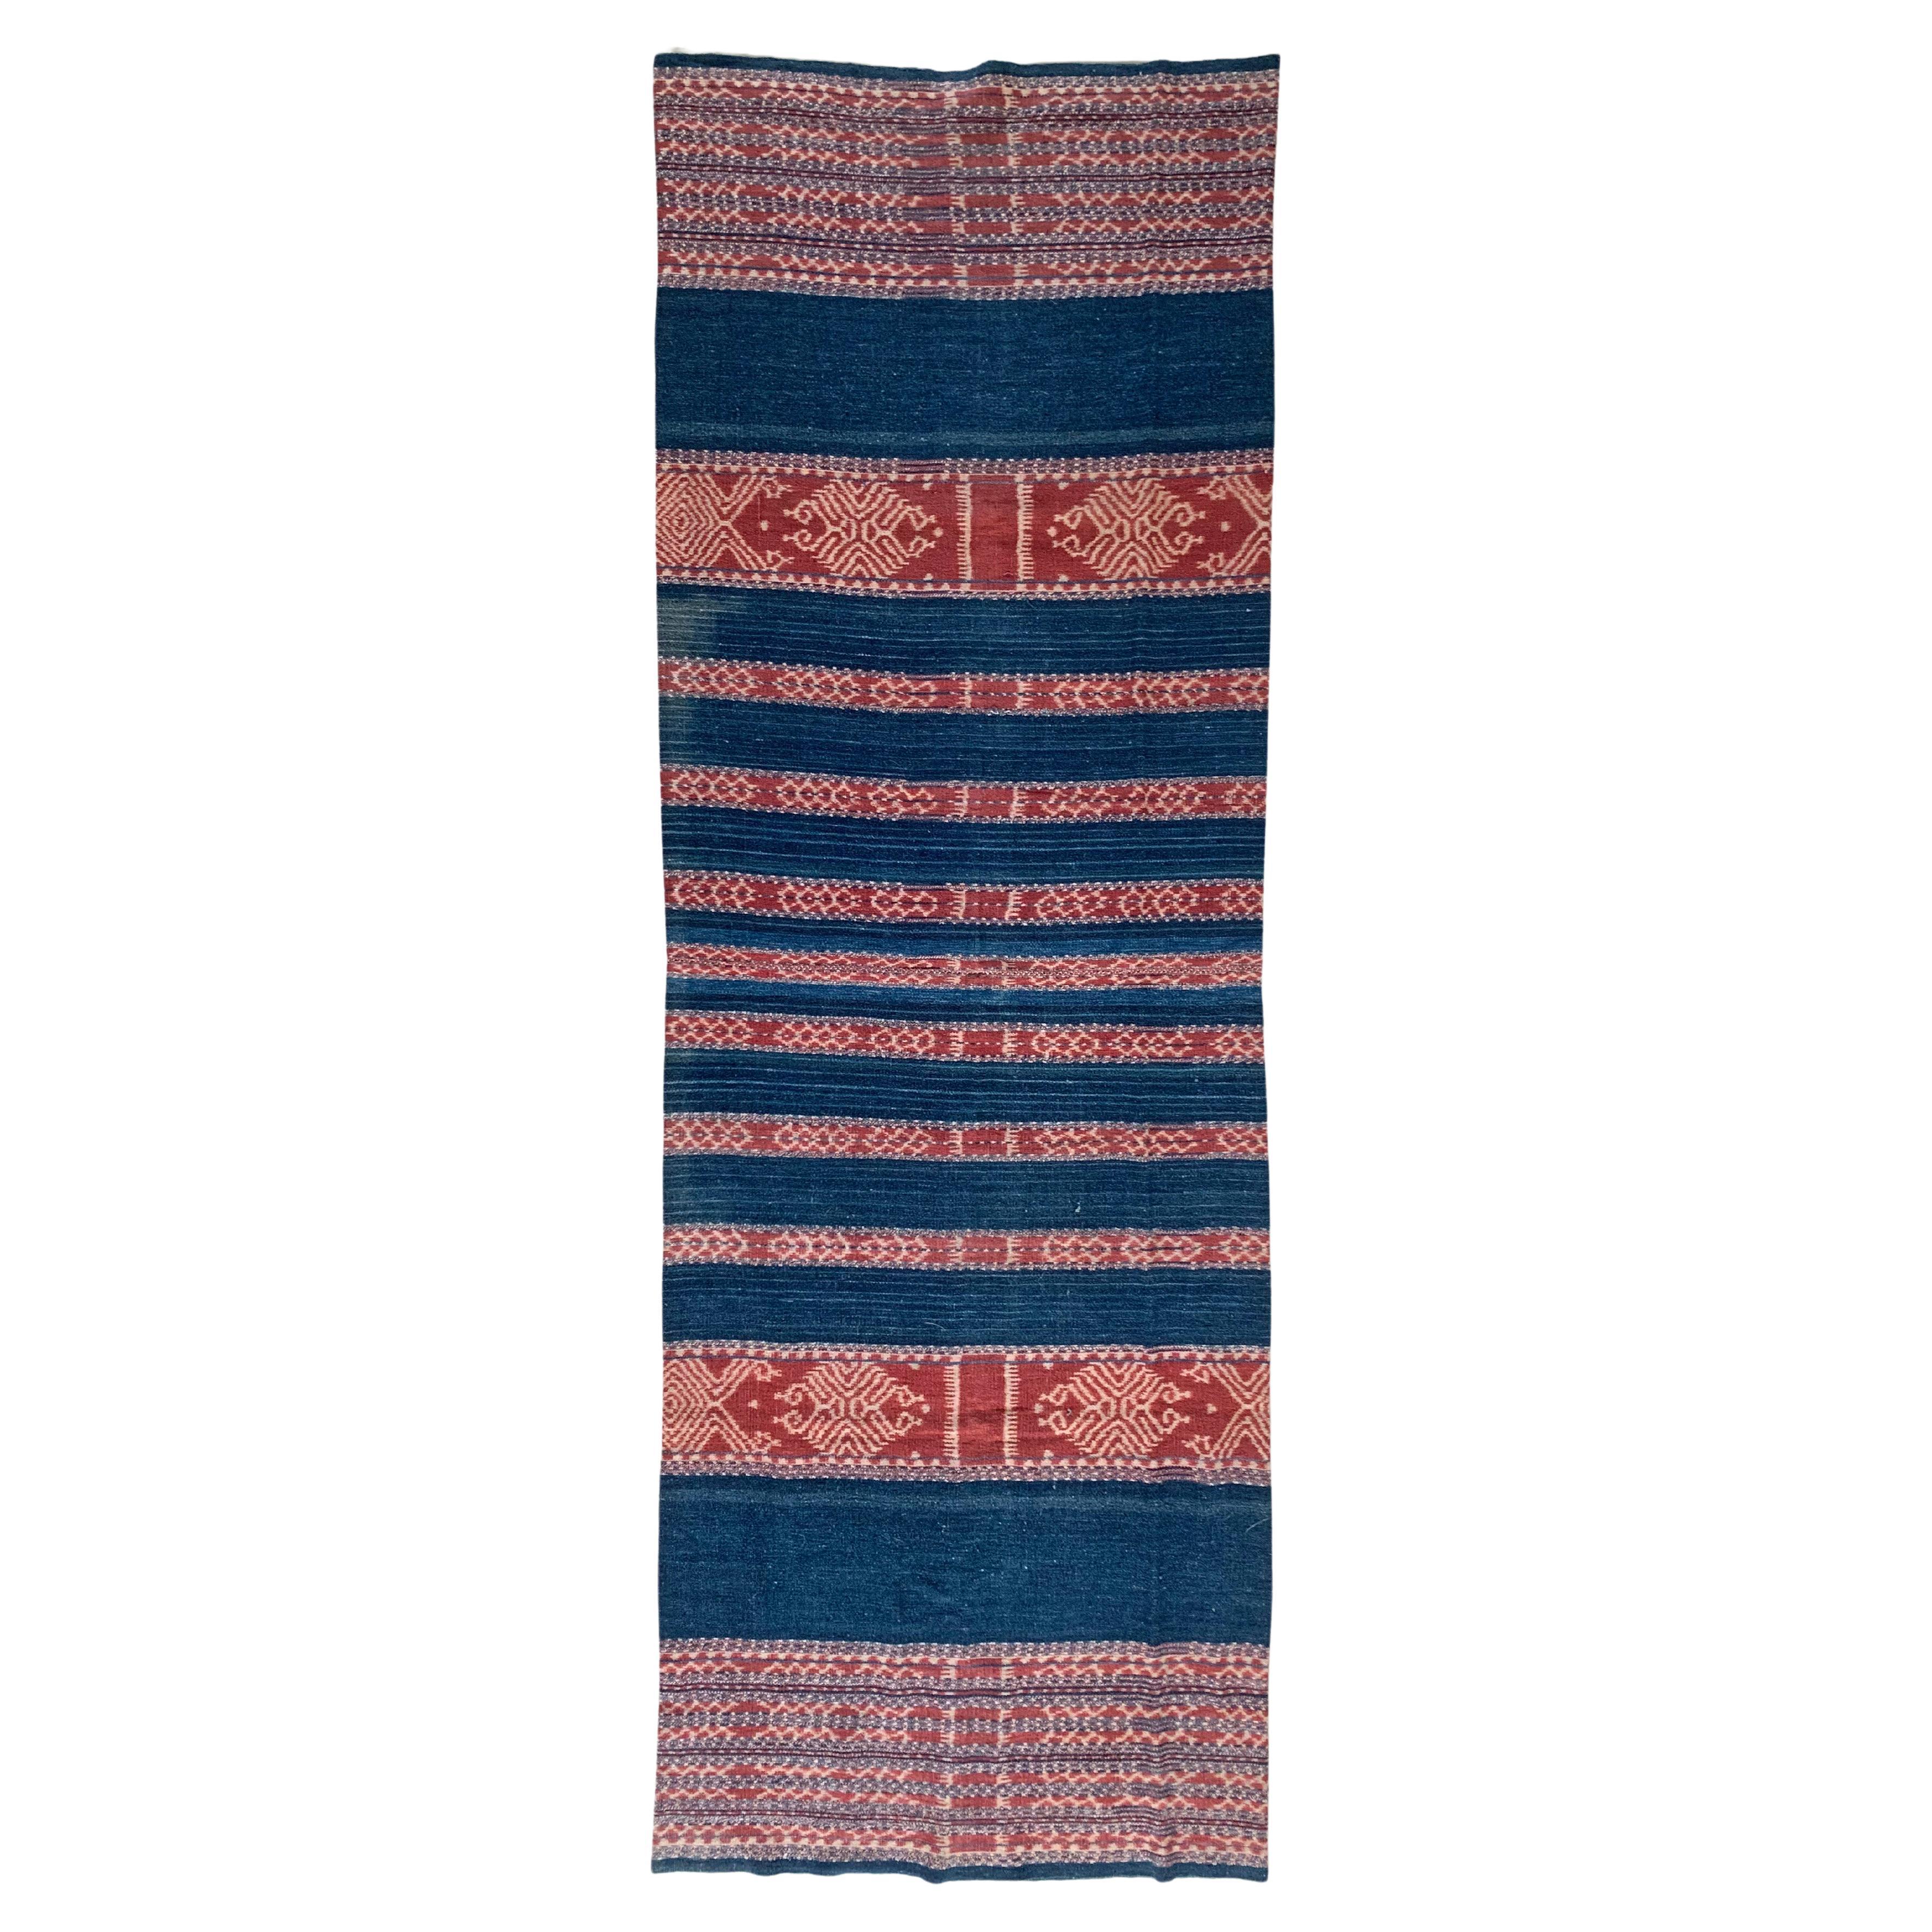 Ikat Textile from Timor with Naturally Coloured Dye & Tribal Motifs, Indonesia